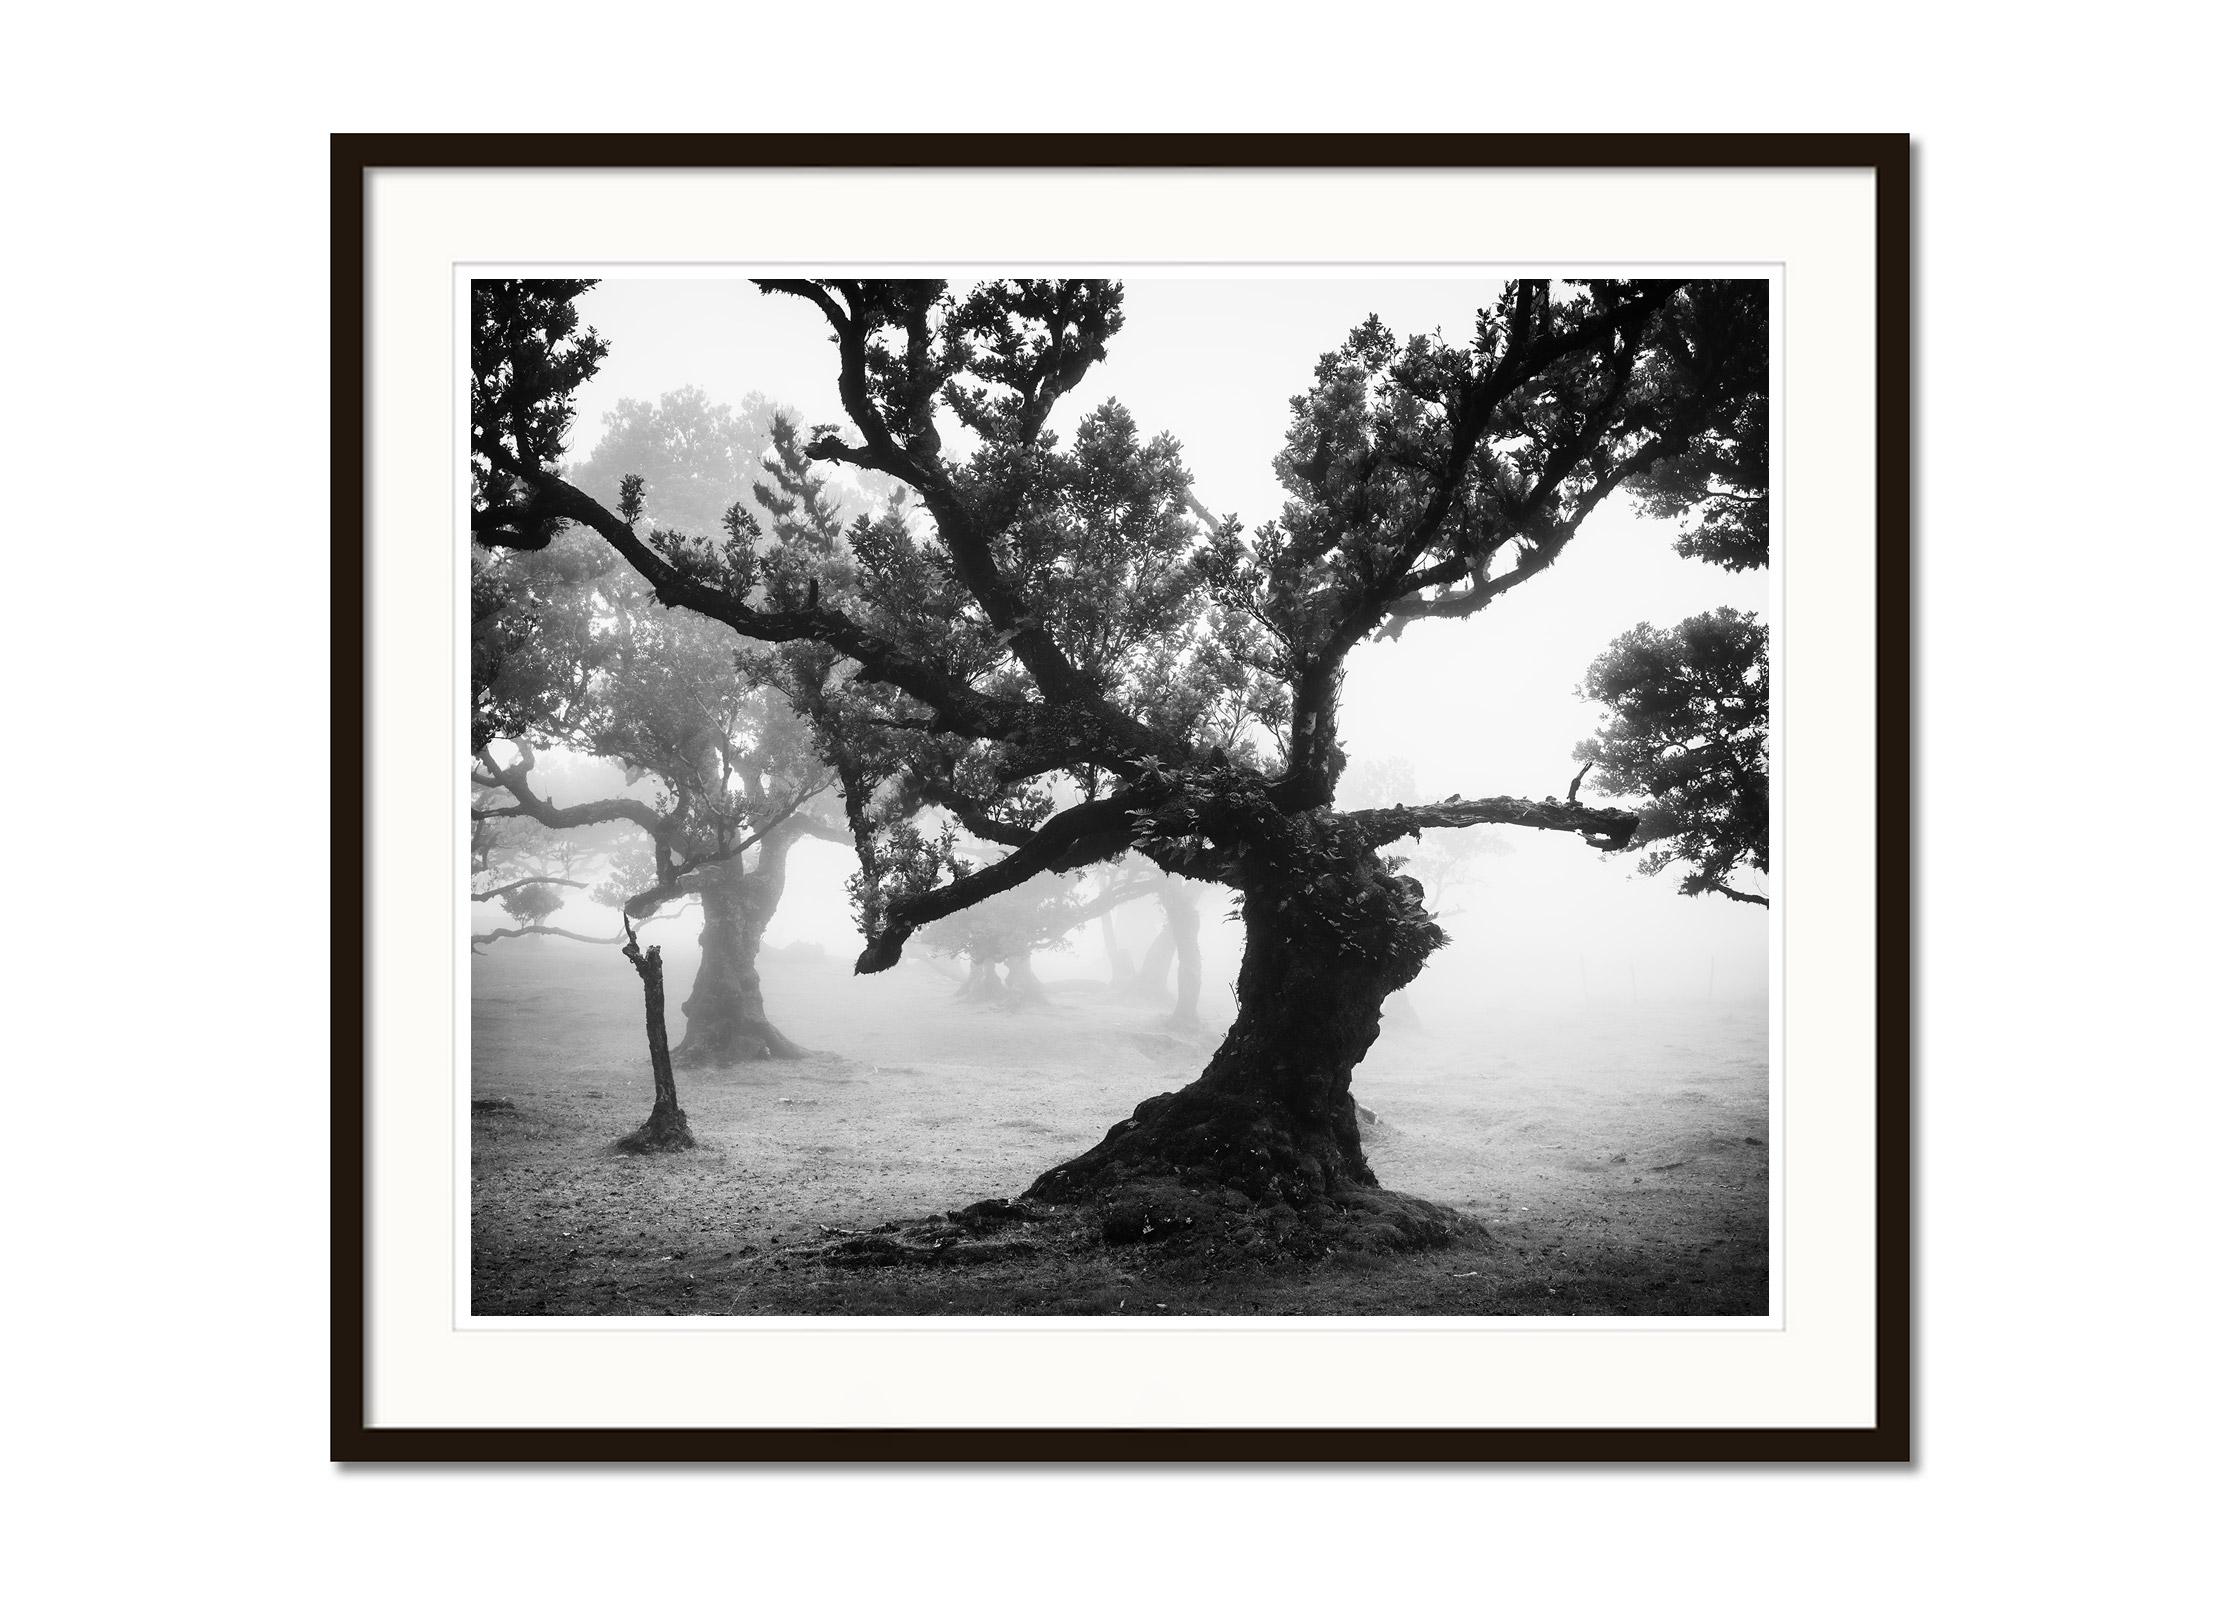 Black and white fine art landscape photography. Mystical forest with bent trees, Fanal, Madeira, Portugal. Archival pigment ink print as part of a limited edition of 8. All Gerald Berghammer prints are made to order in limited editions on